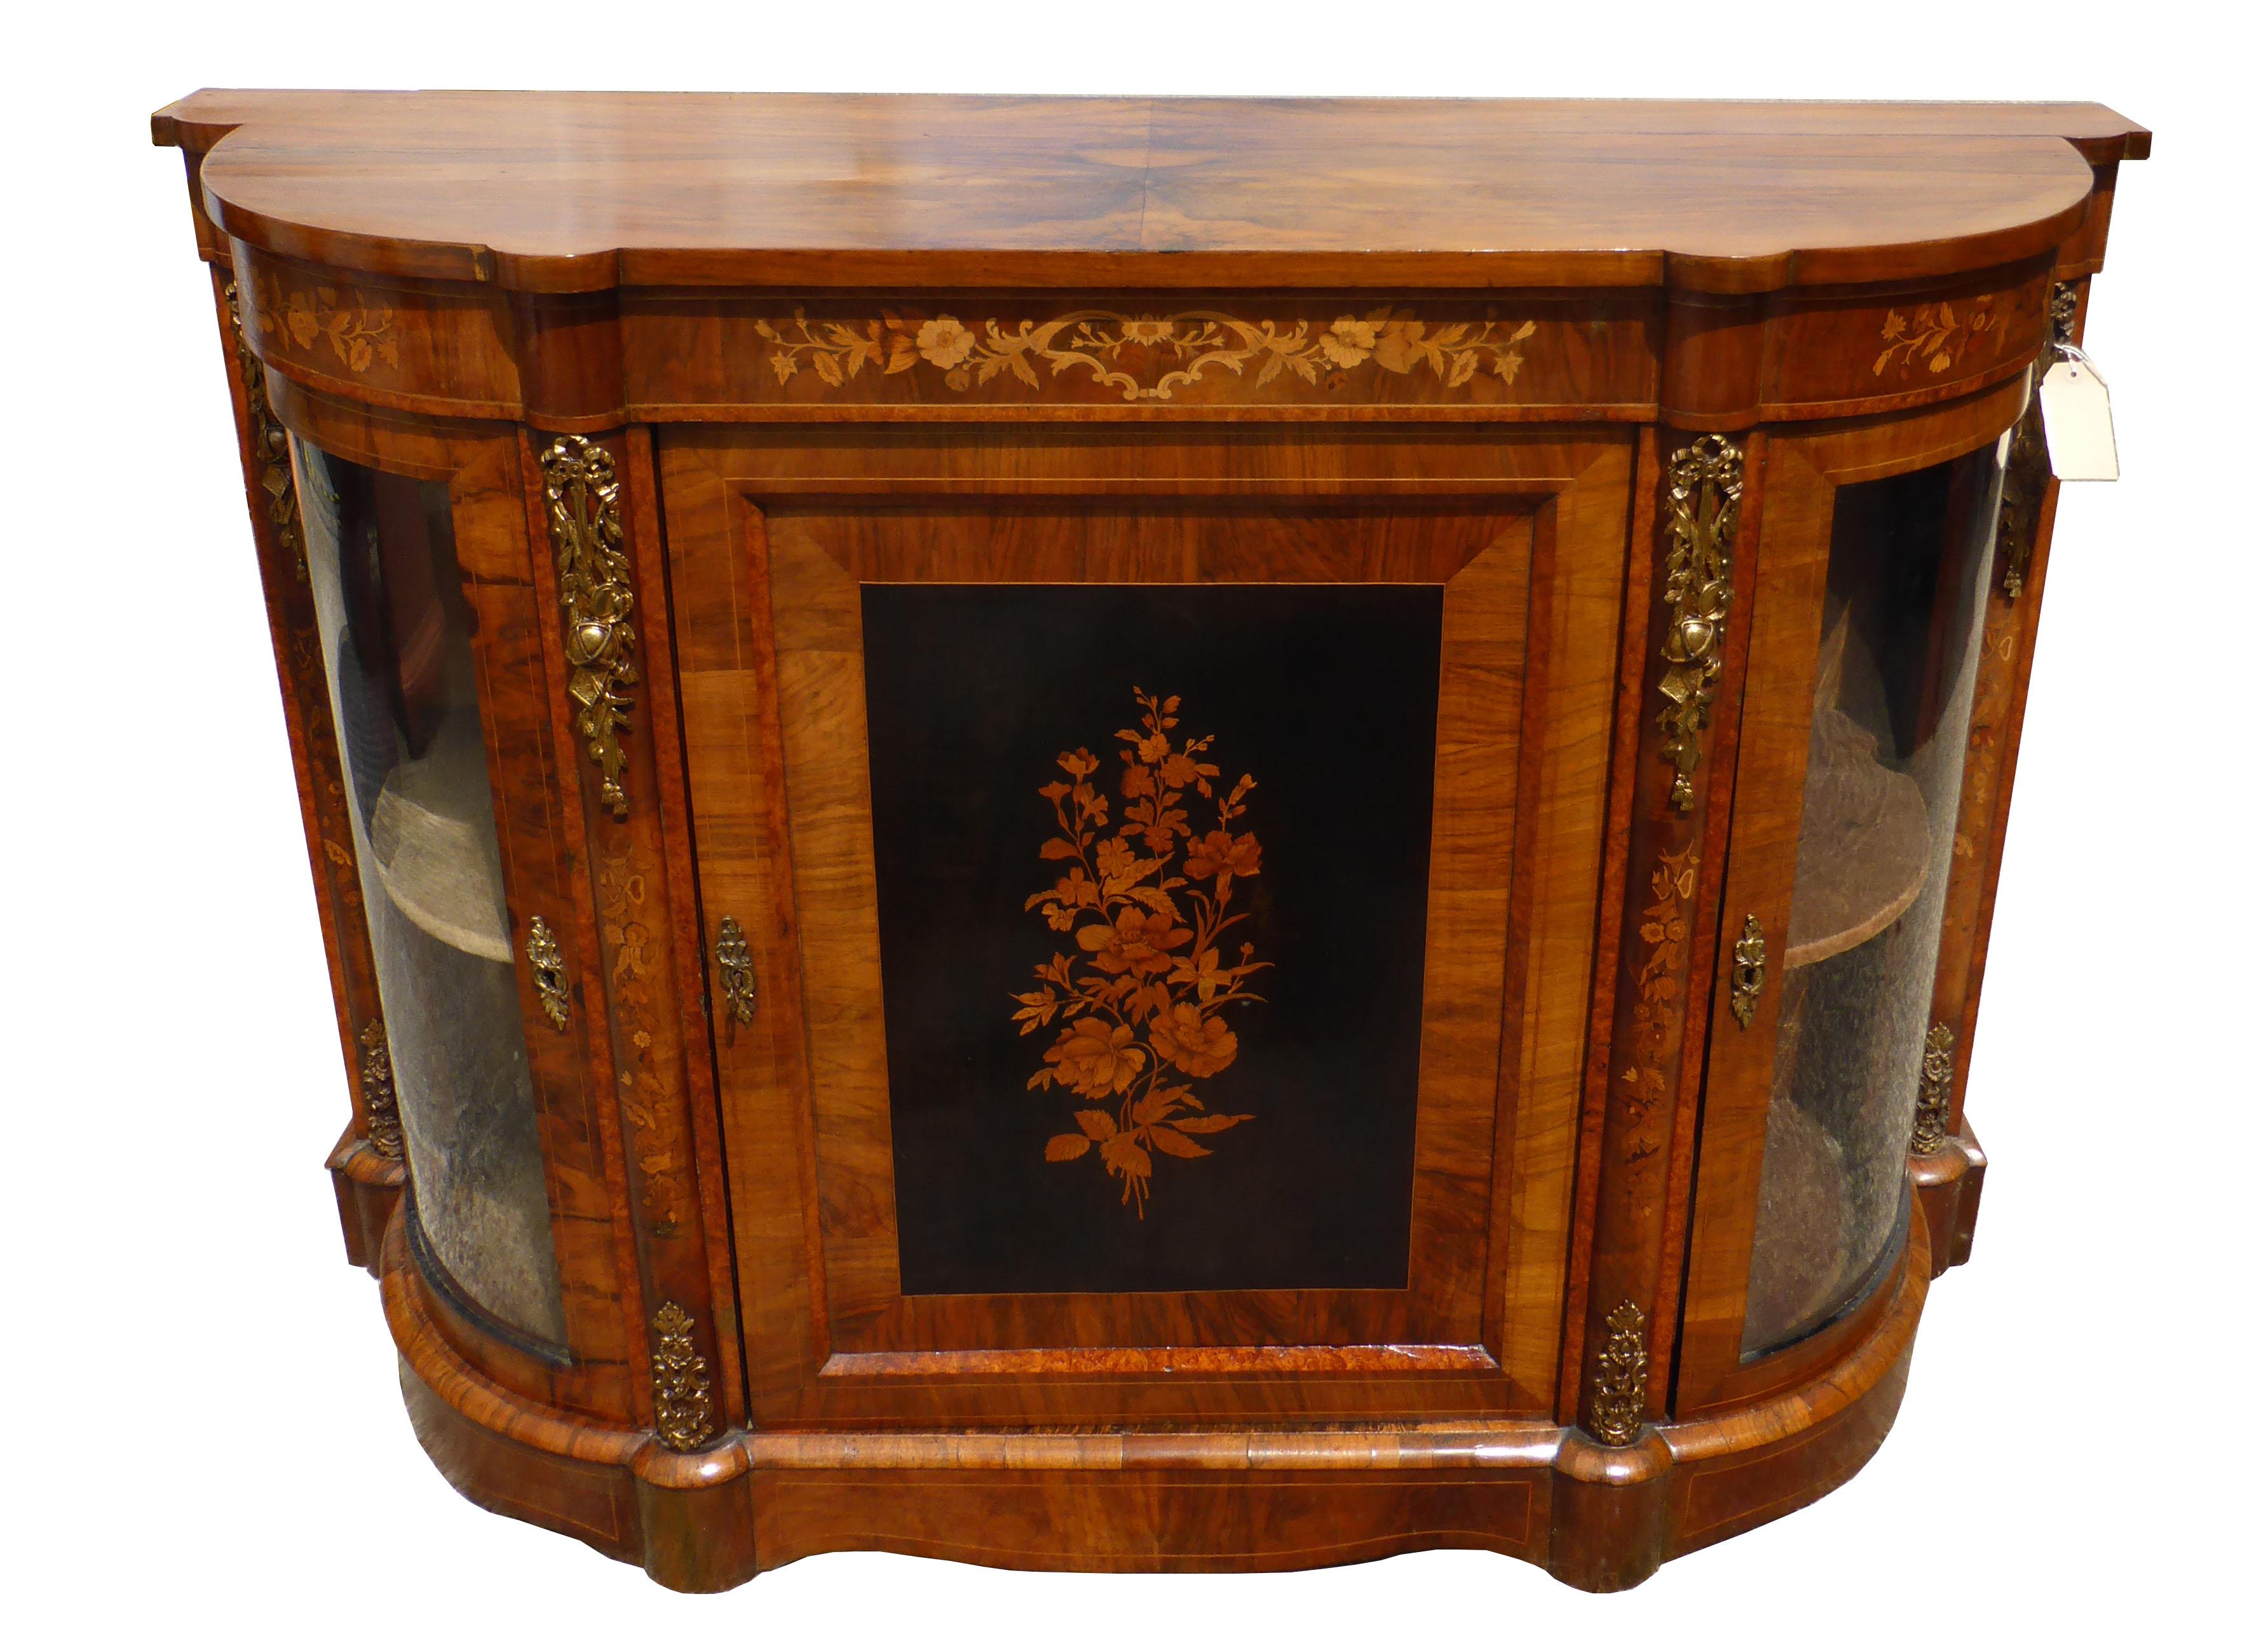 For sale is a good quality 19th century Victorian figured walnut and marquetry credenza, being bowed in shape, having a marquetry inlaid centre door, flanked by a bowed and glazed doors on either side. The credenza is in good condition, having minor